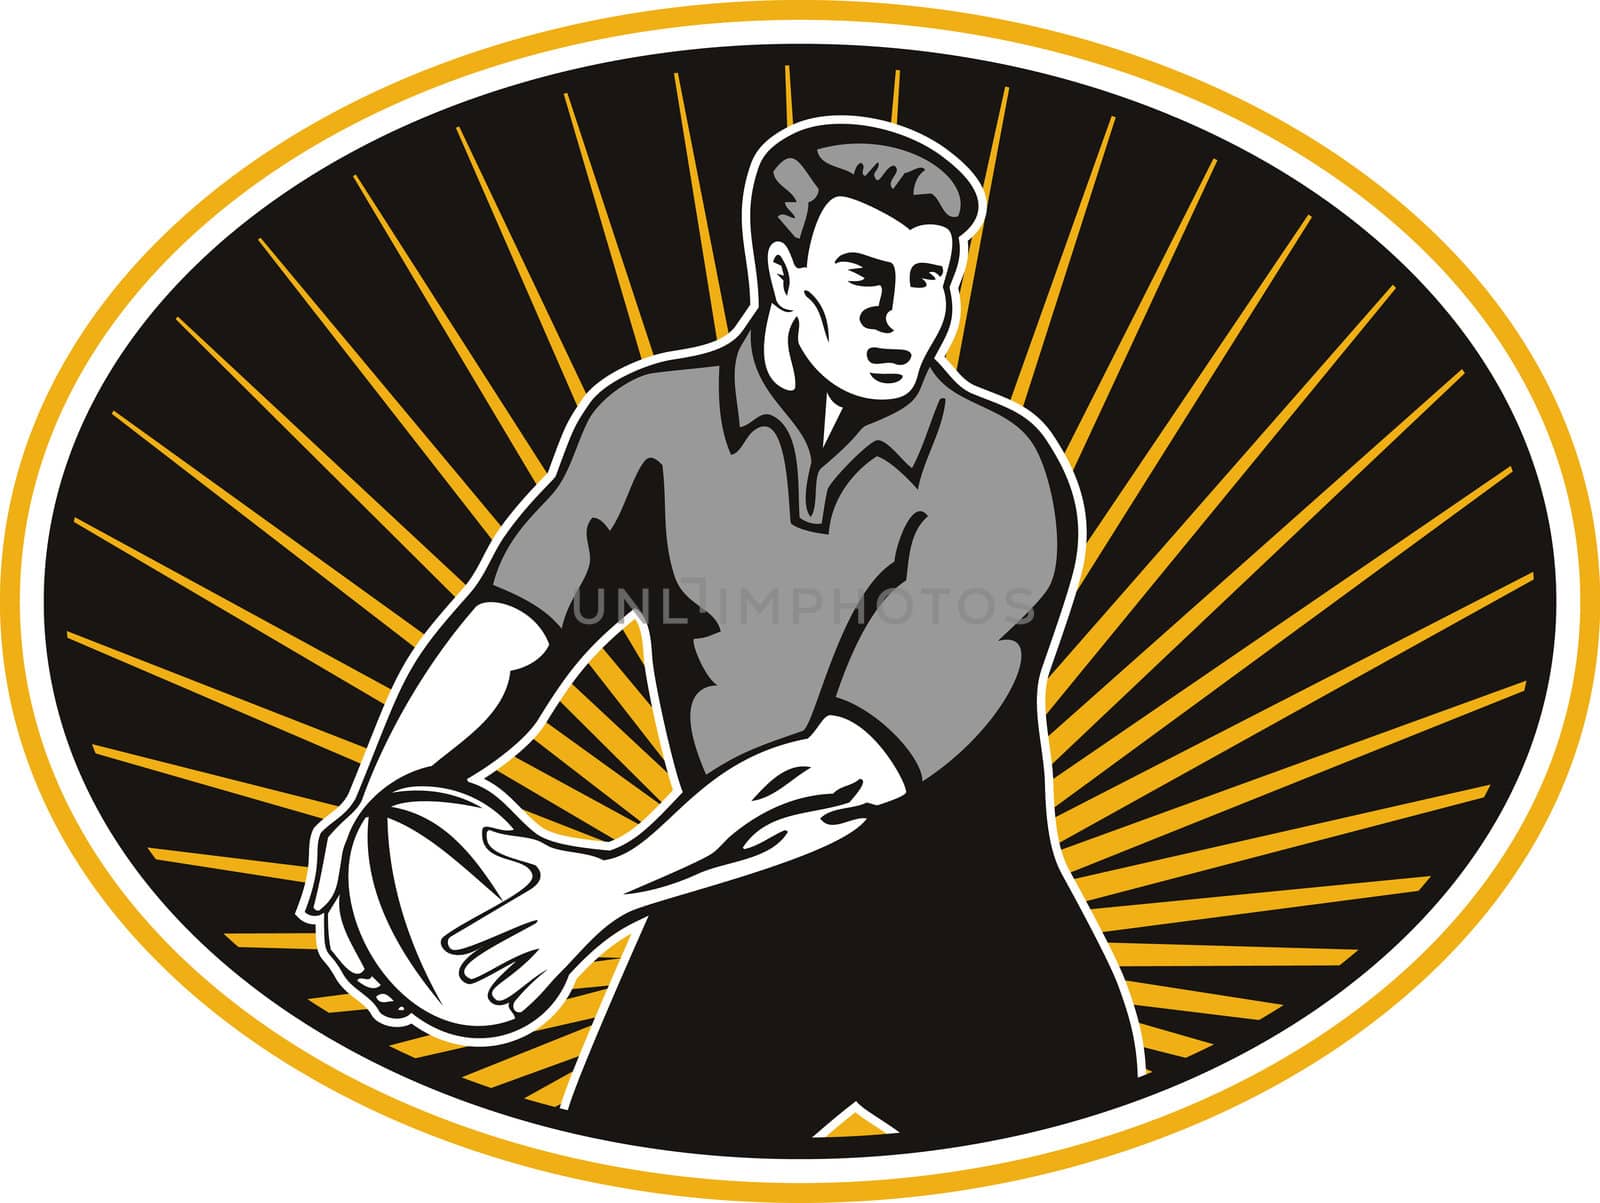 retro style illustration of a rugby player passing ball viewed from front set inside ellipse